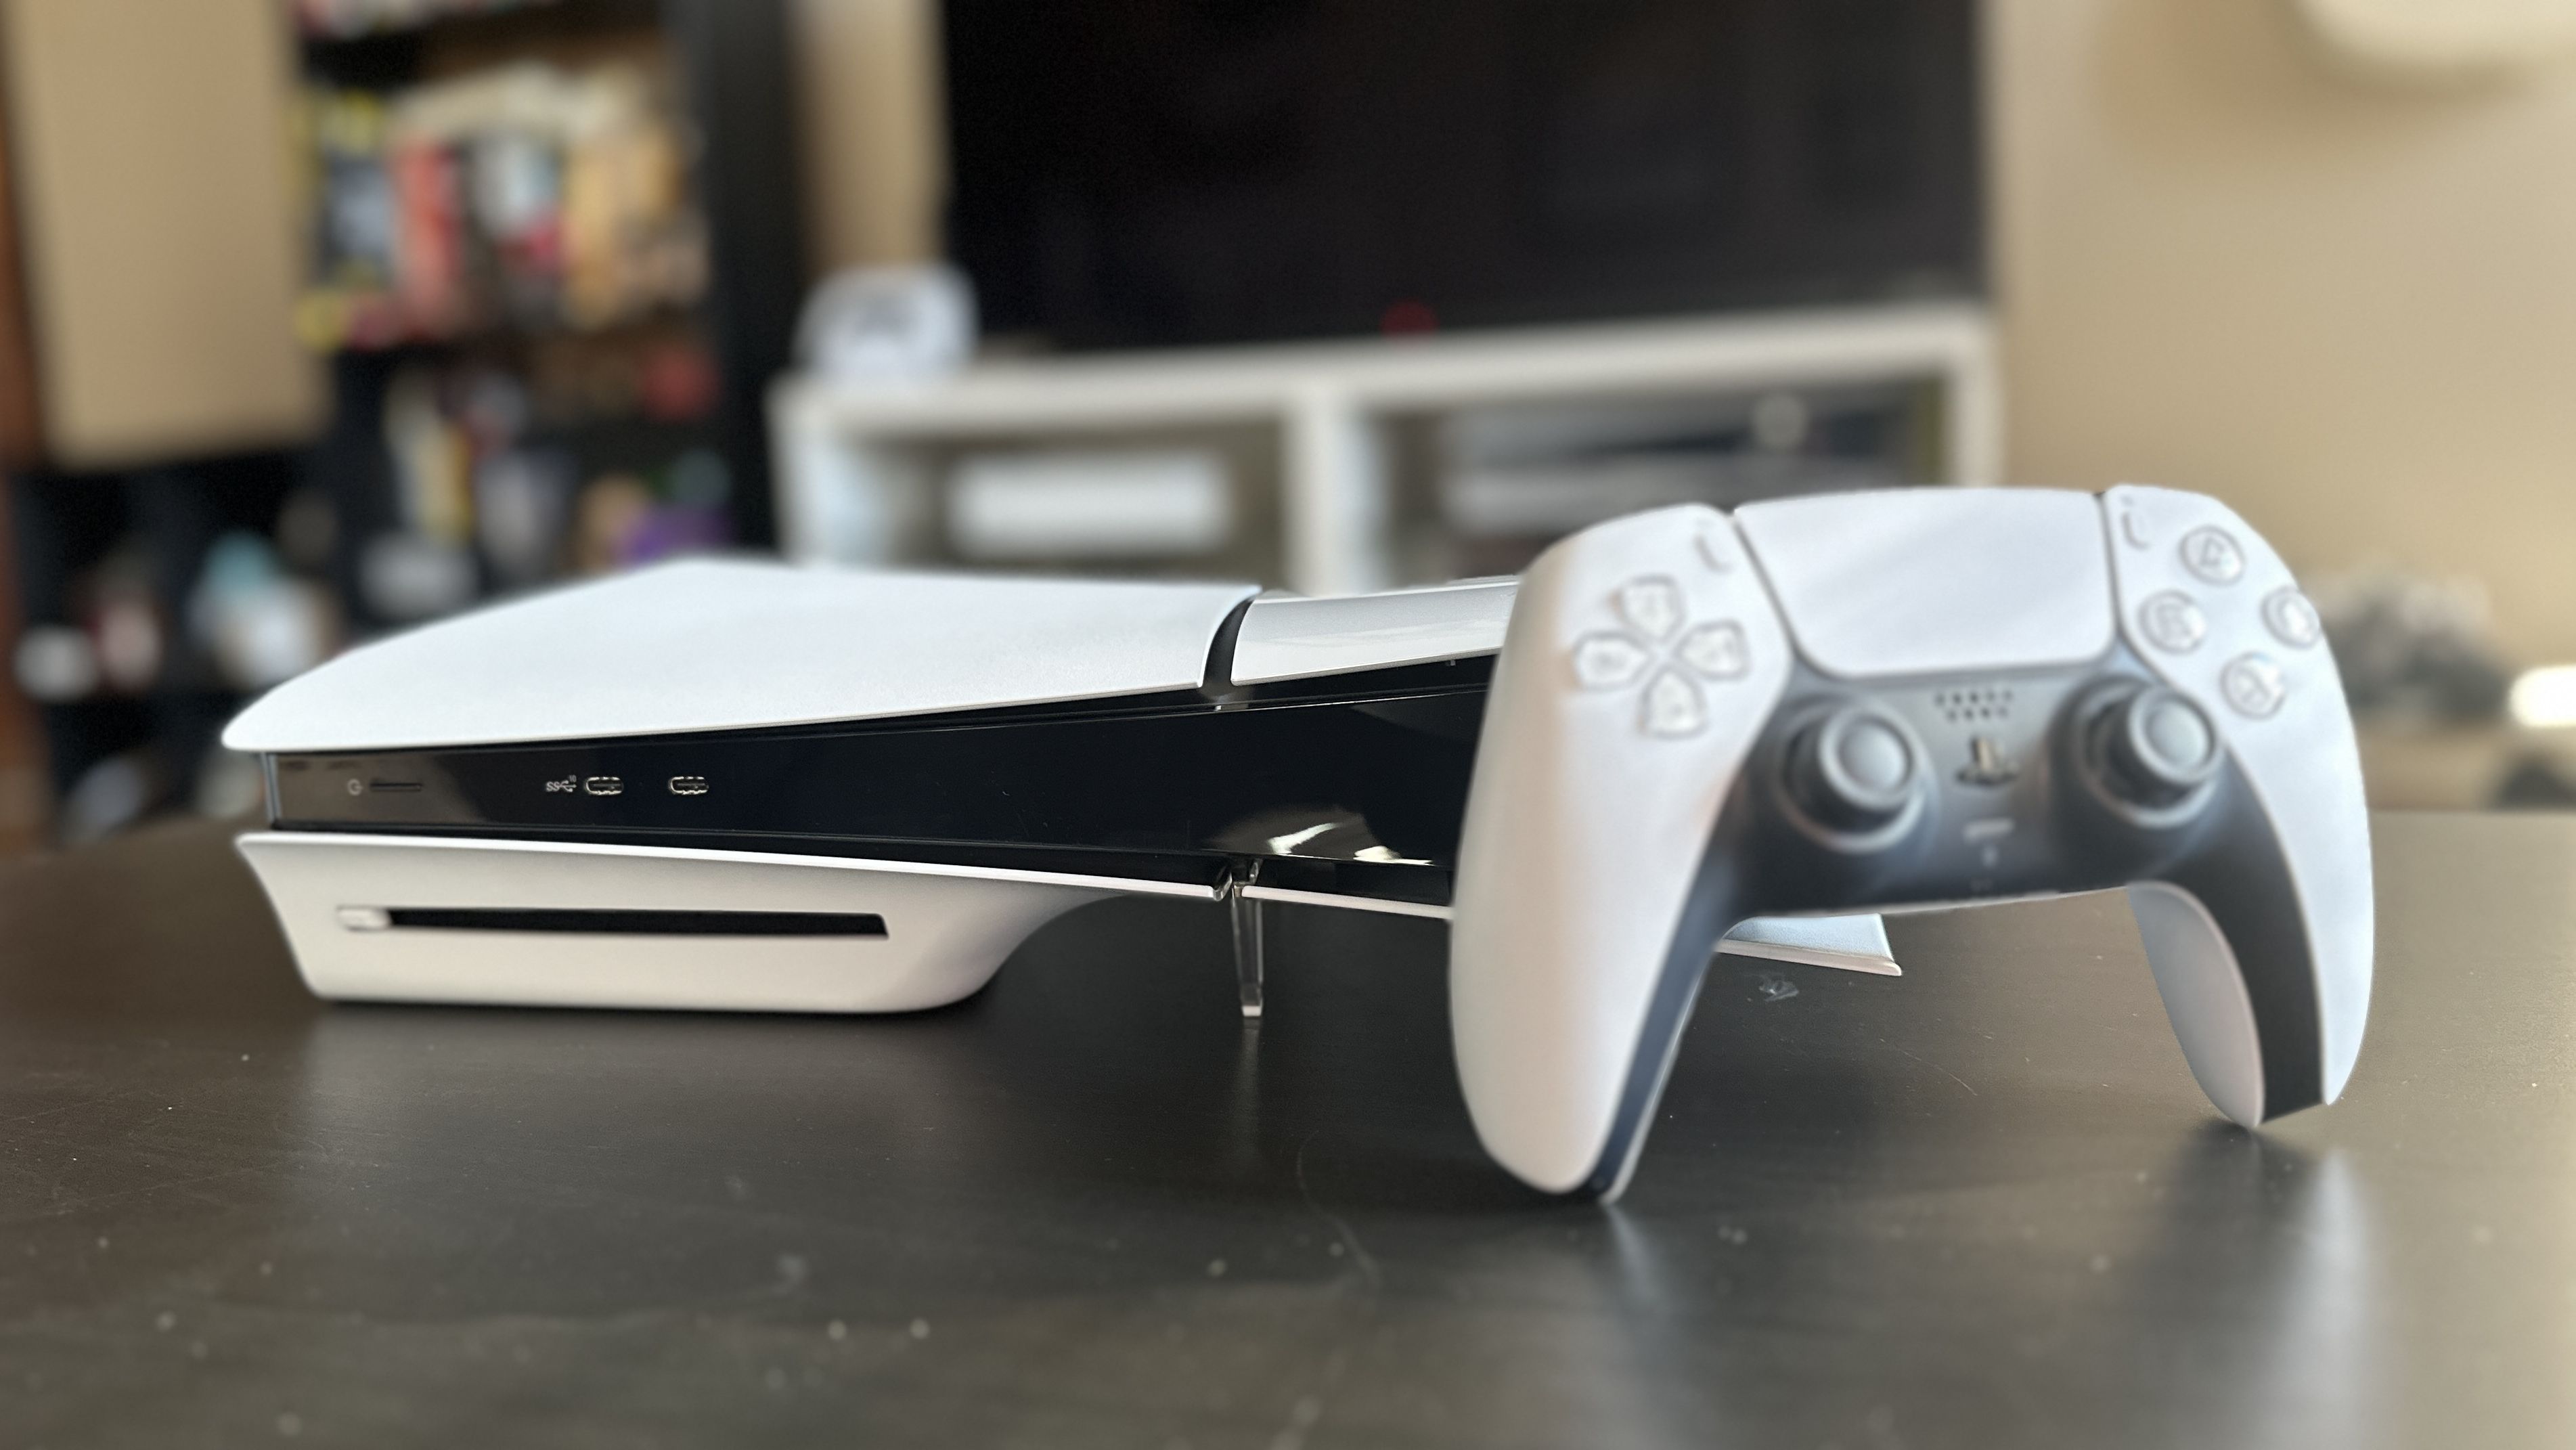 PS5 Slim hands-on: What’s new and different? | CNN Underscored